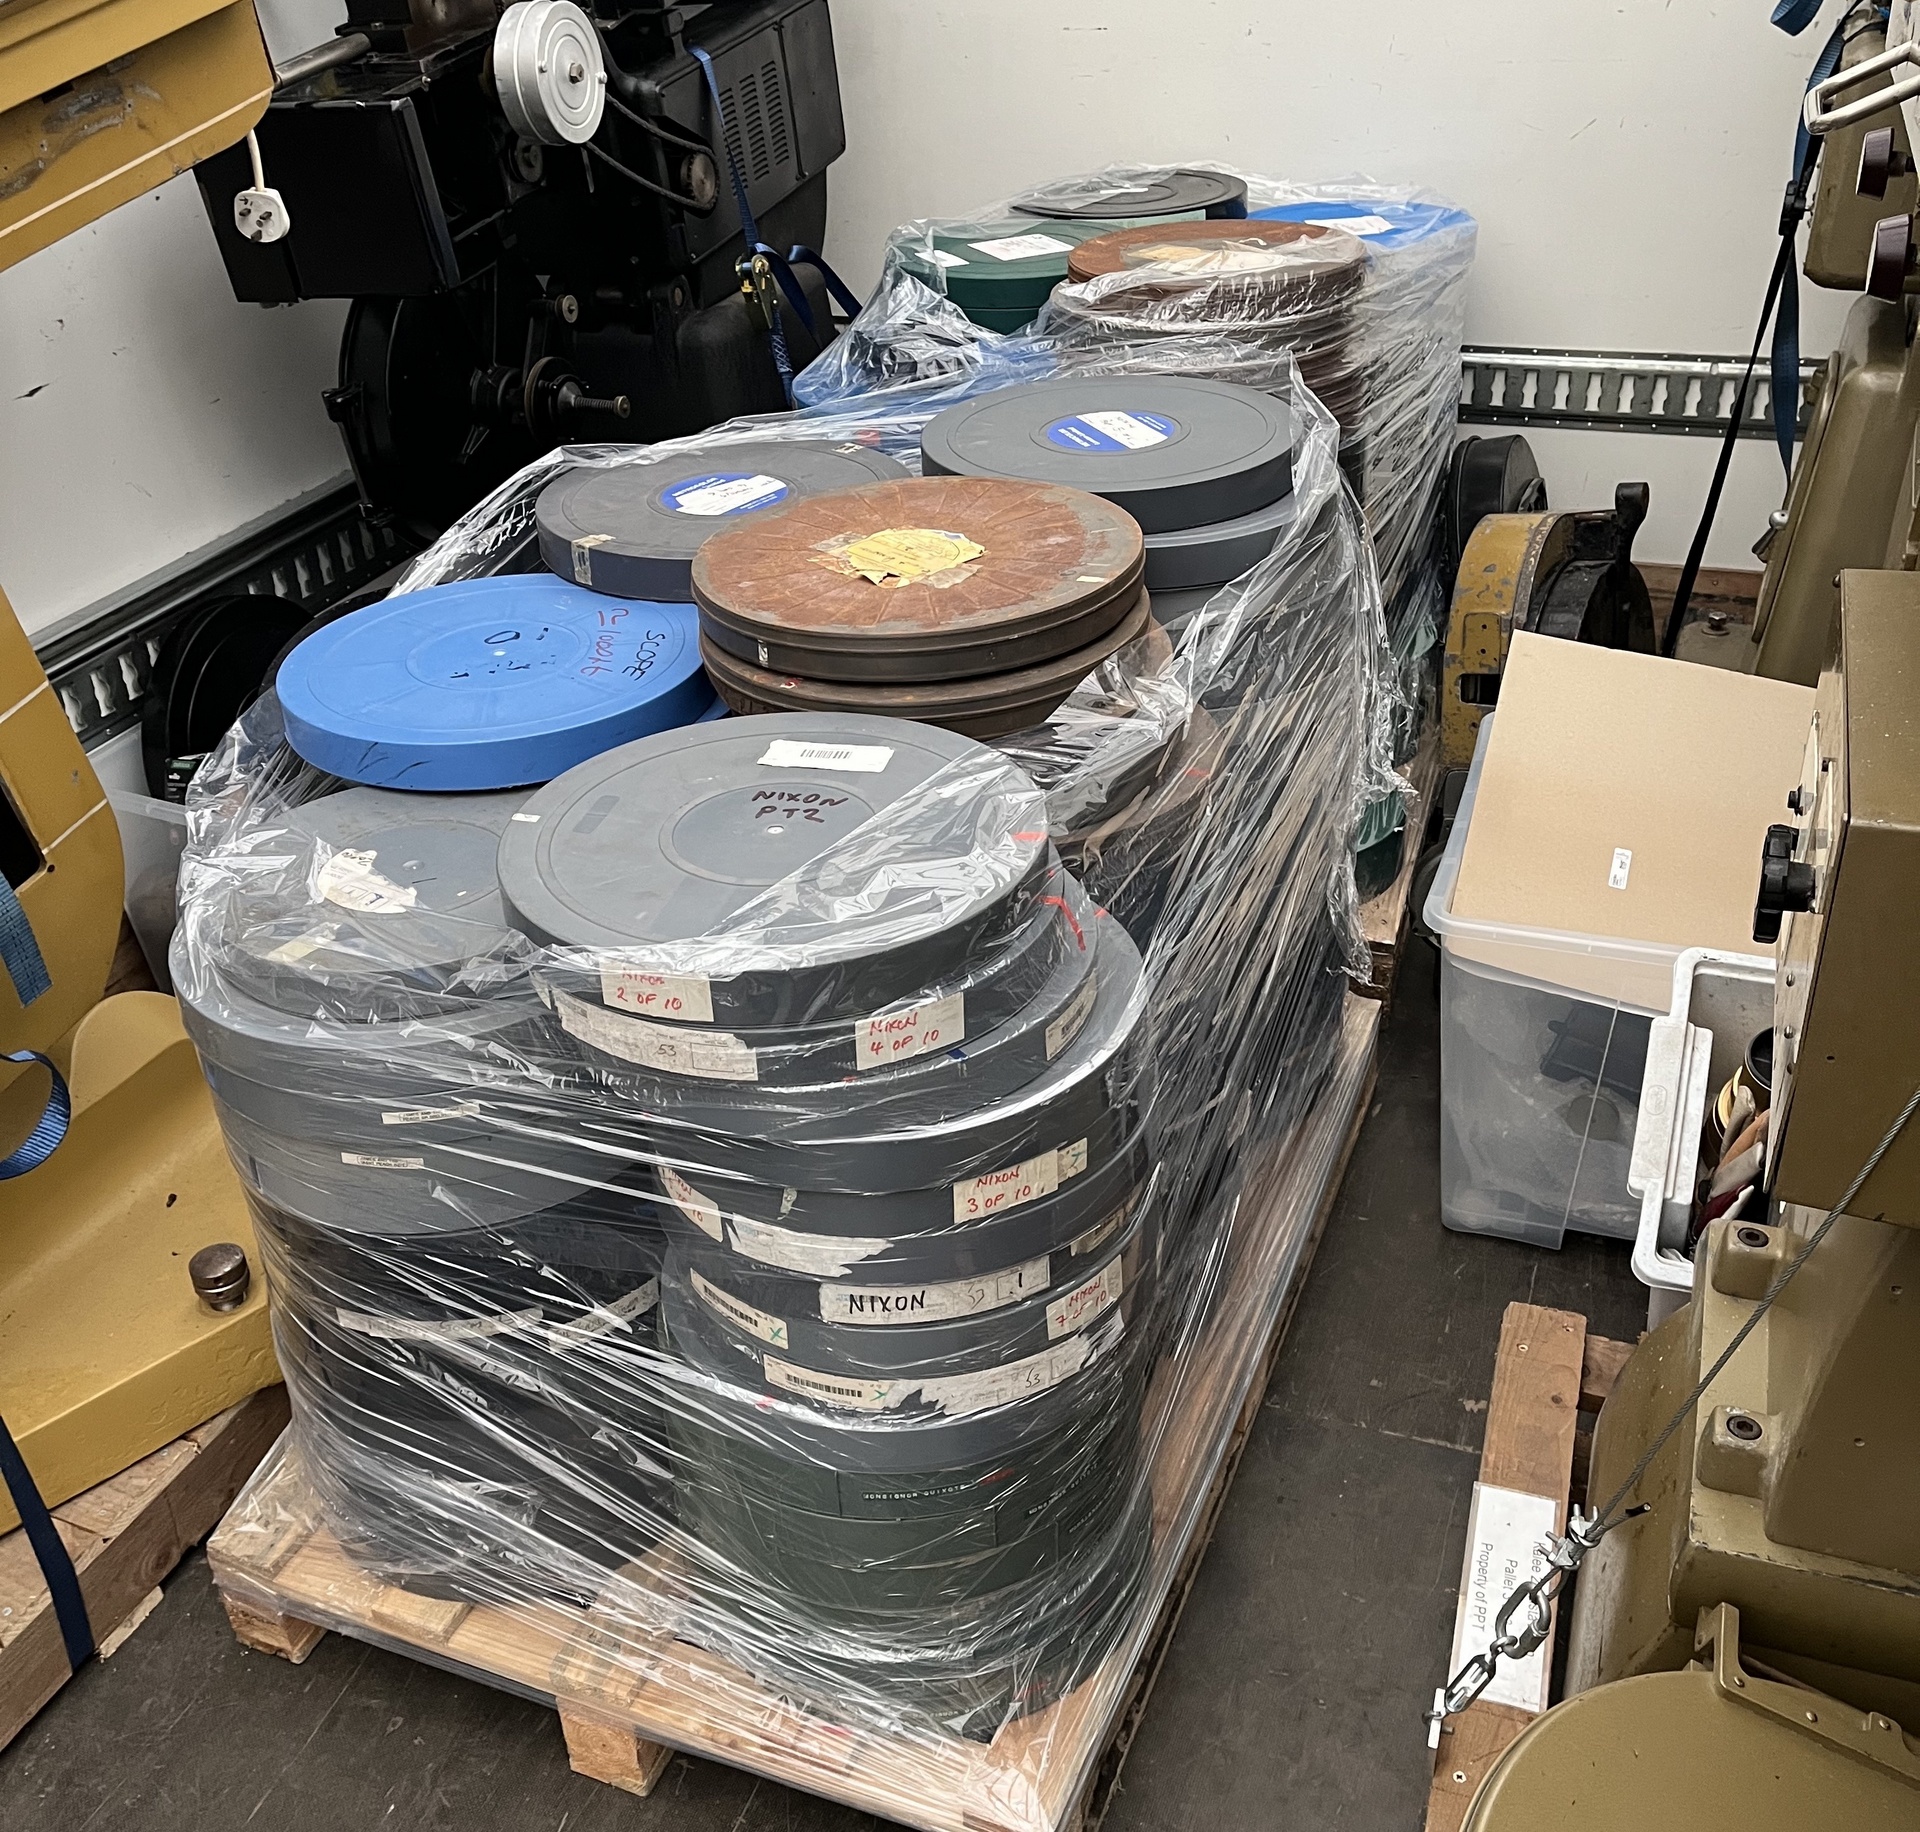 Two pallets of 35mm films